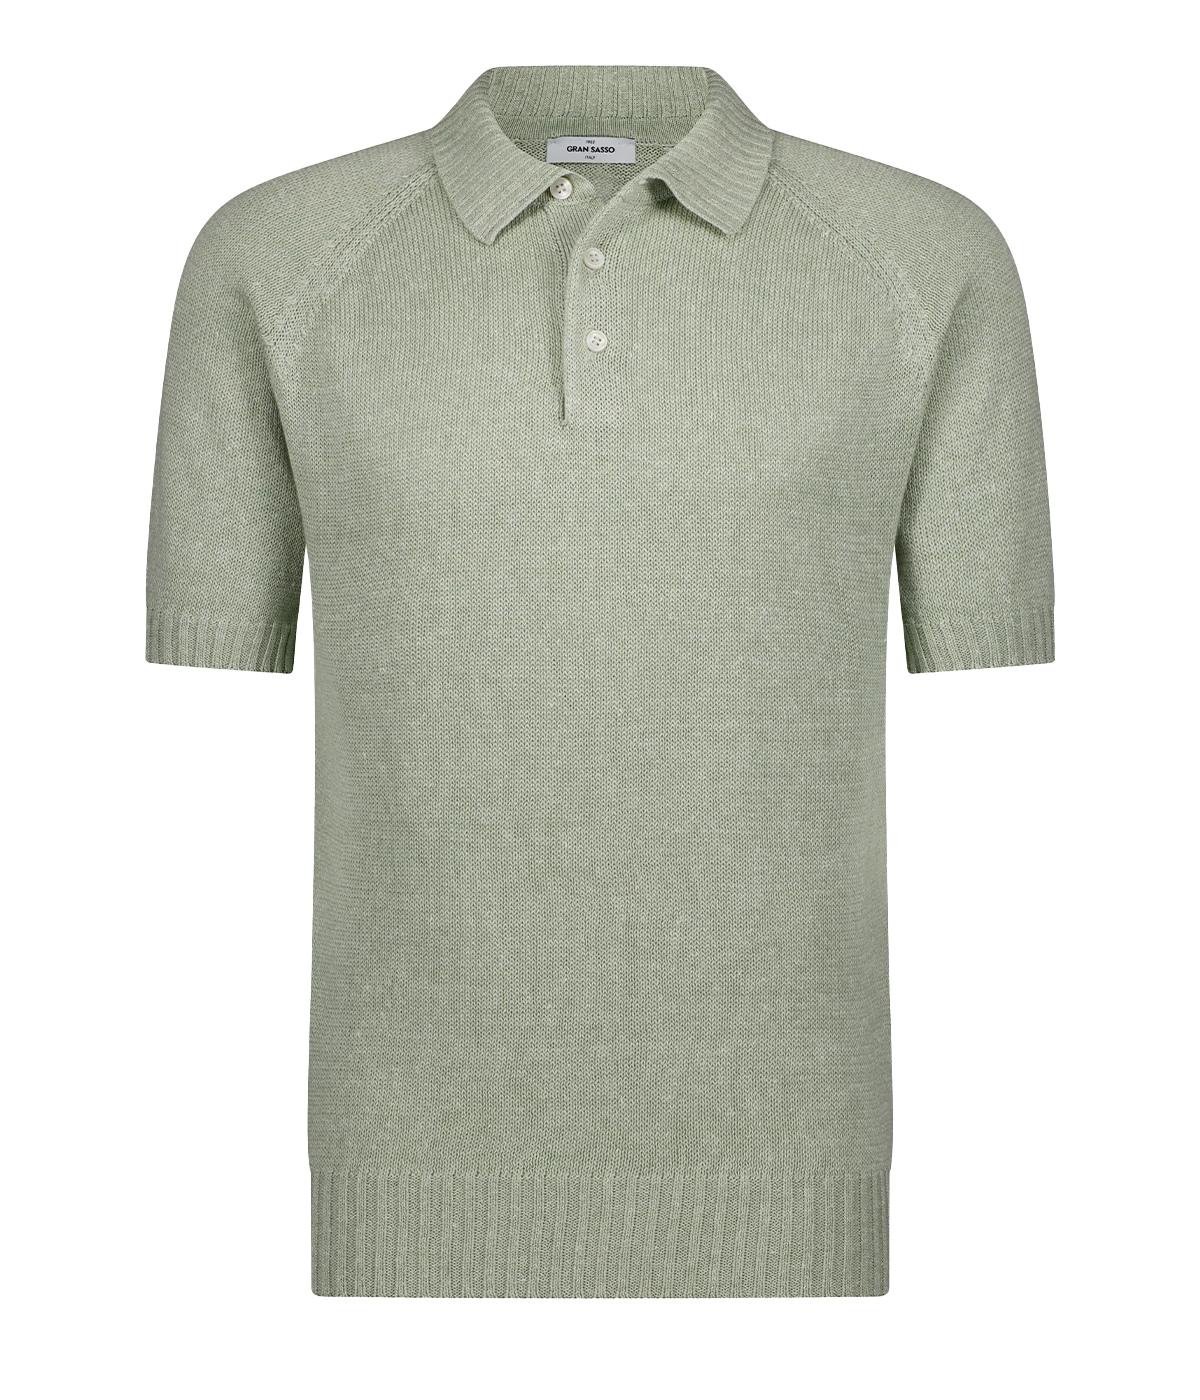 A timeless classic short sleeve polo in a mint, knitted material, made in Italy, featuring three button and collar detailing. Throw on and go, dressy polo, everyday staple.  